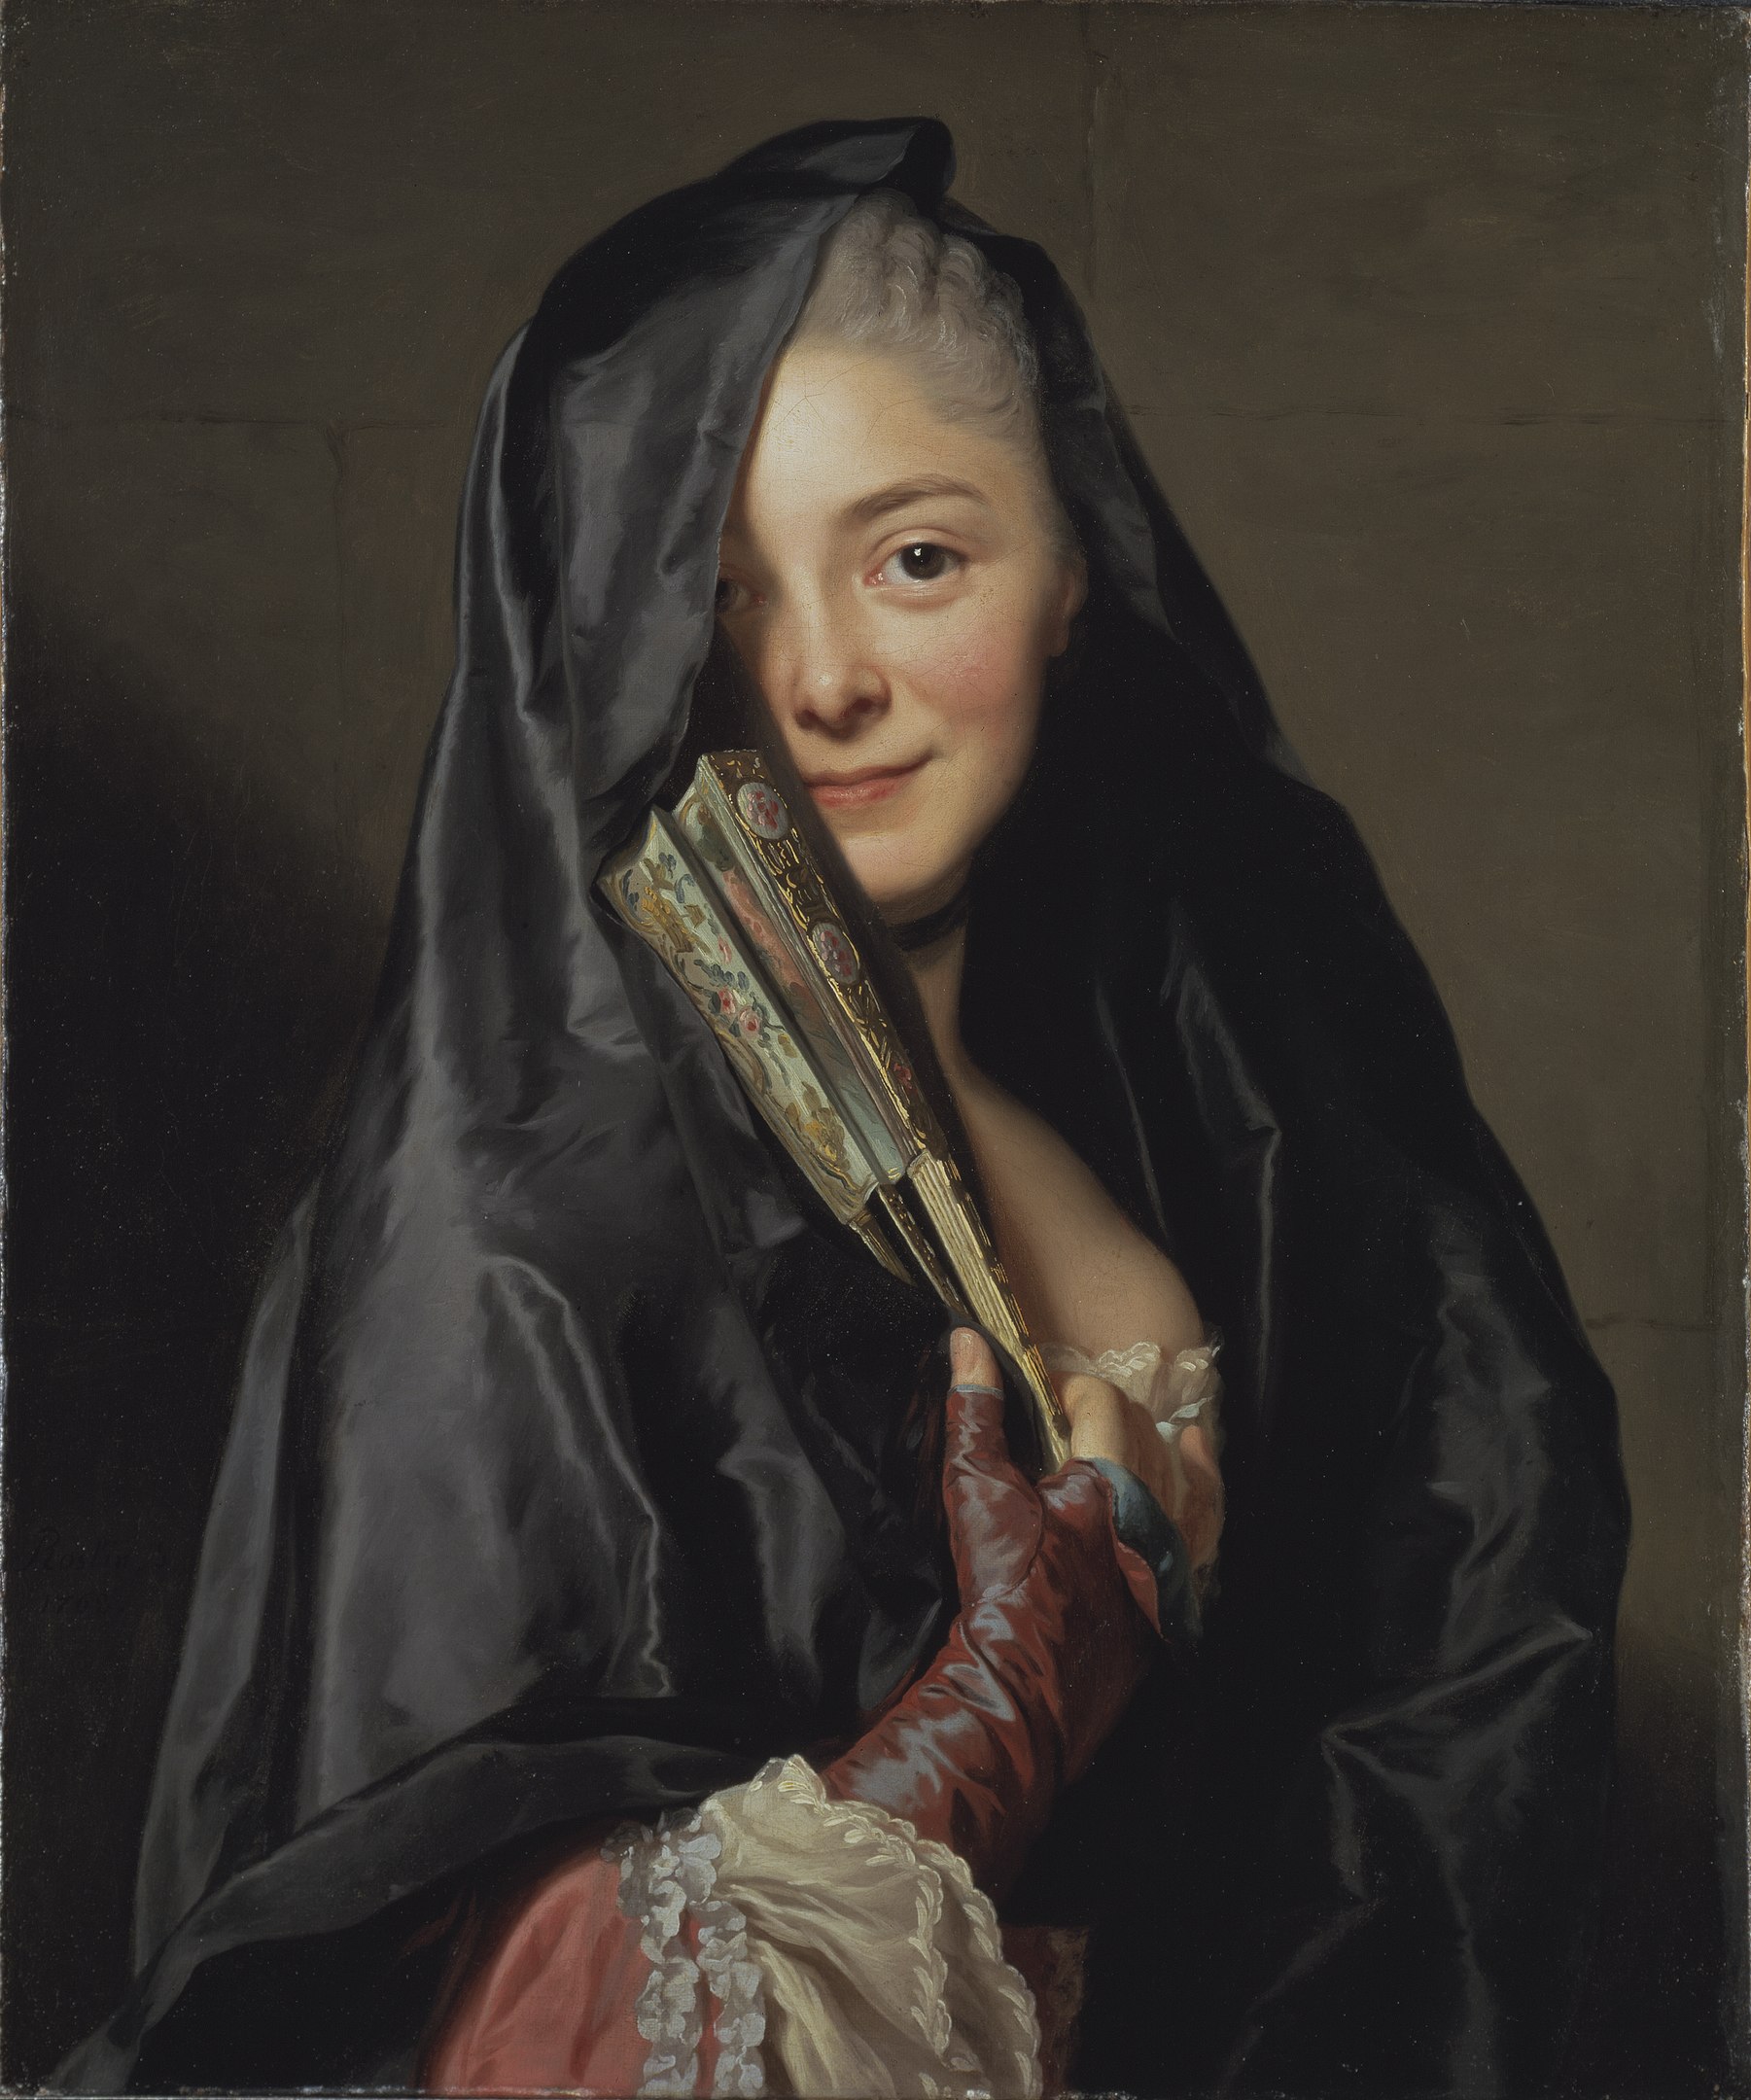 A portrait of a woman posing with a closed fan while her face is half-covered by her veil